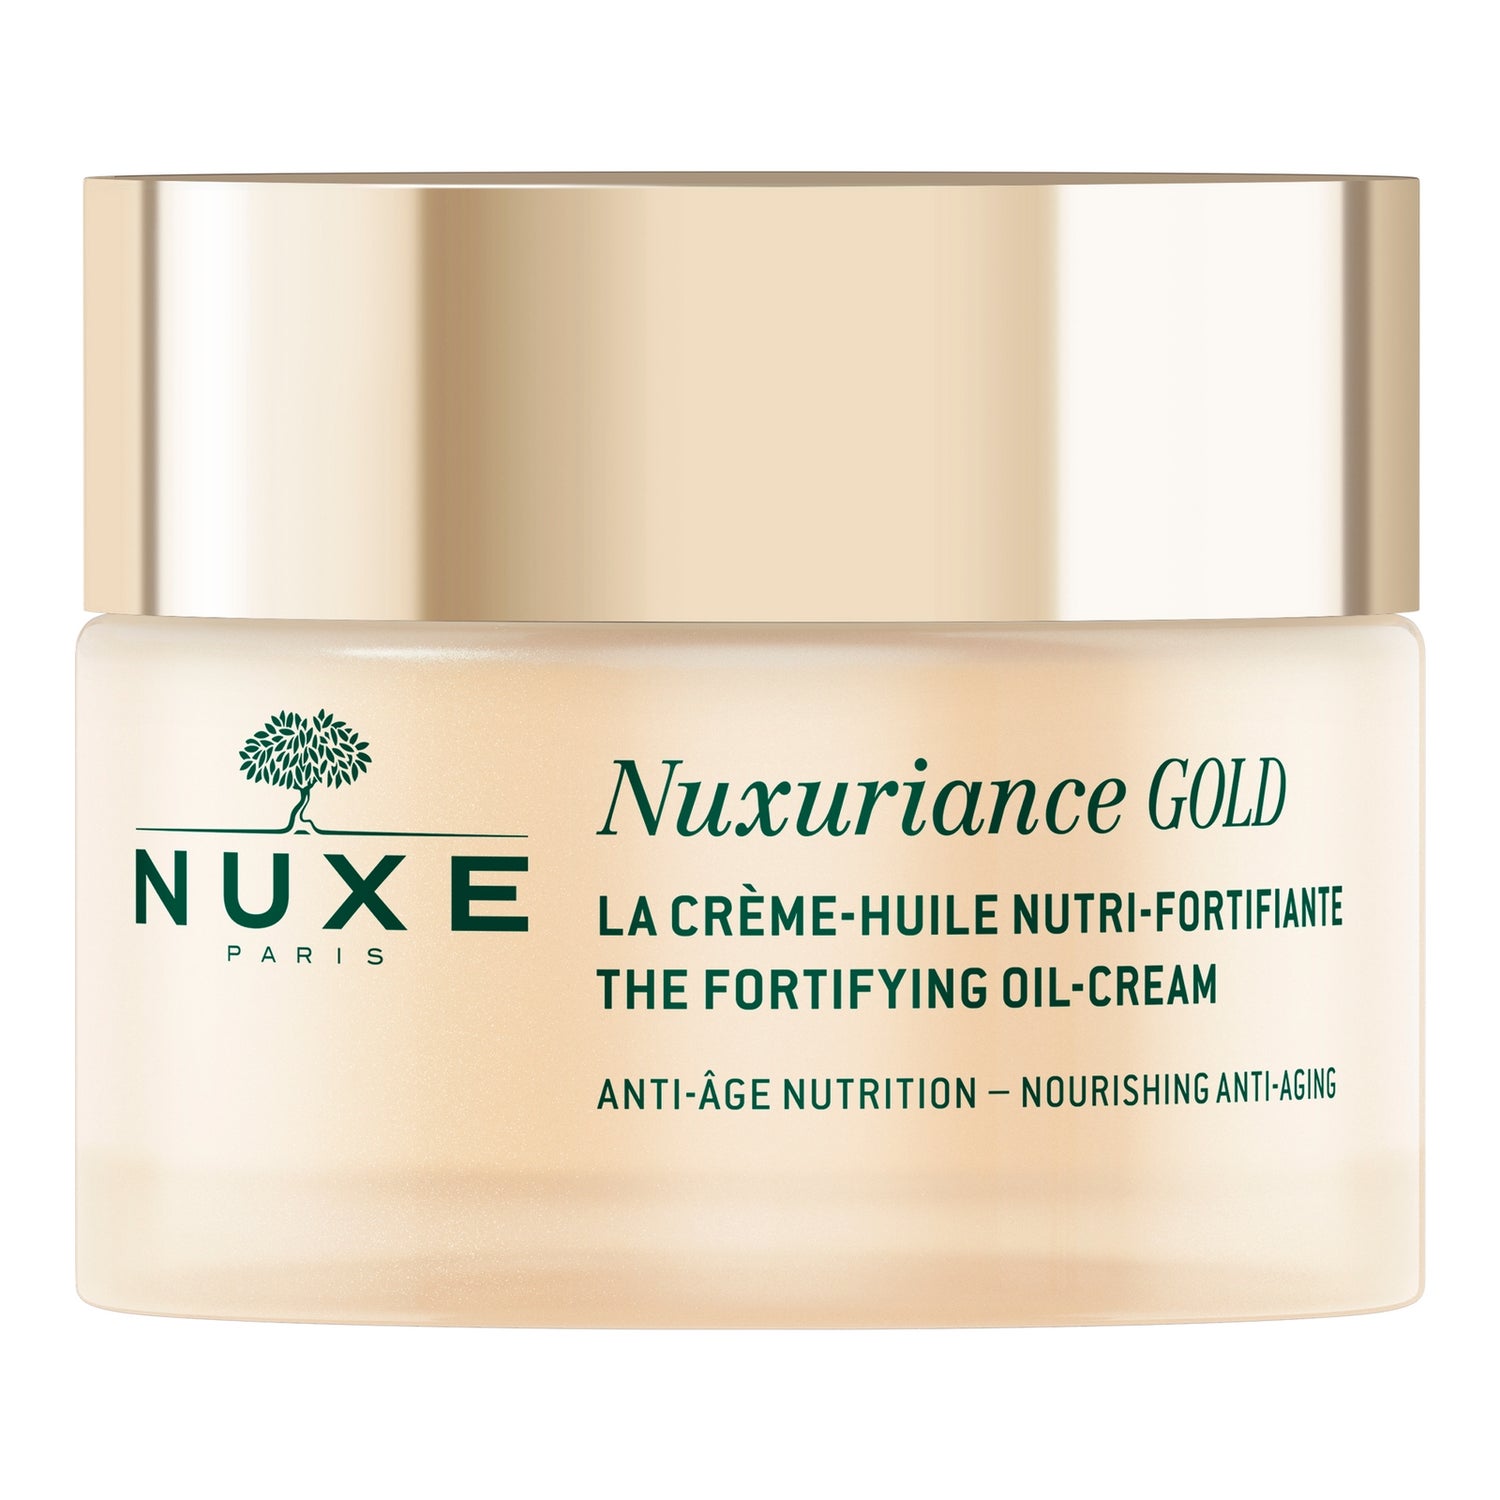 Crema-Aceite Nutri-Fortificante, Nuxuriance Gold 50 ml